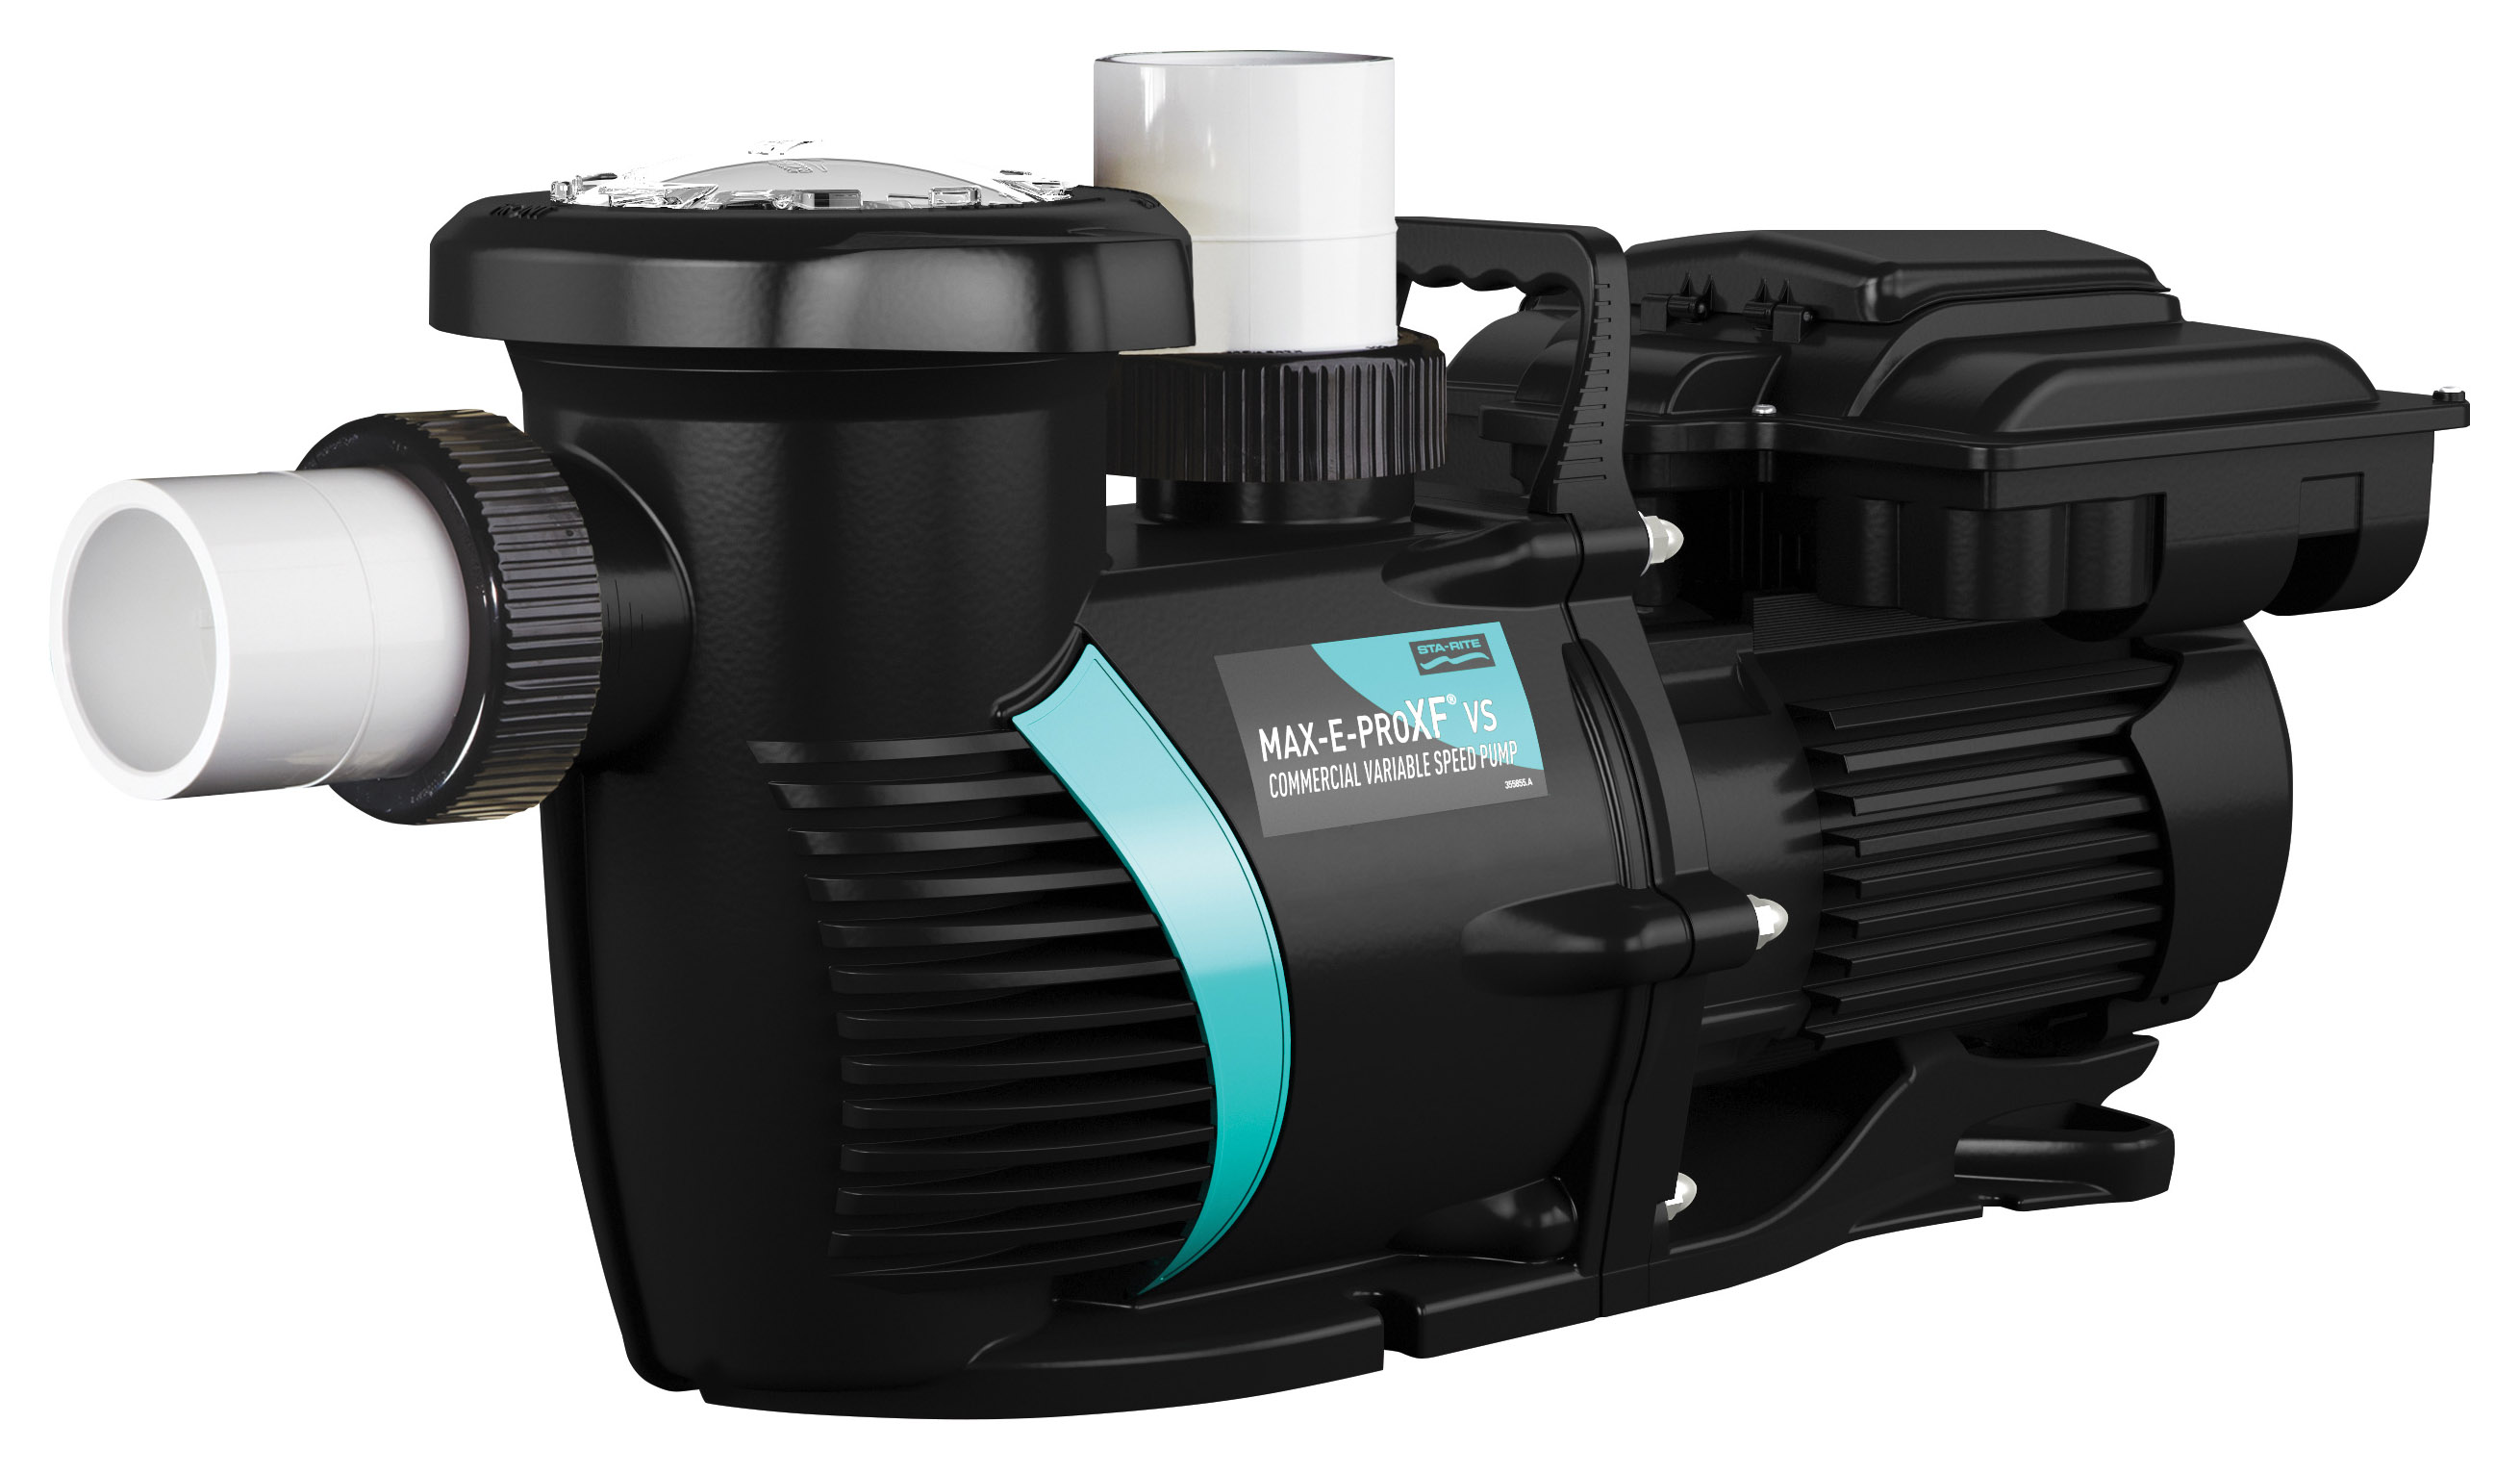 Black pool pump with teal design at 45 degree angle